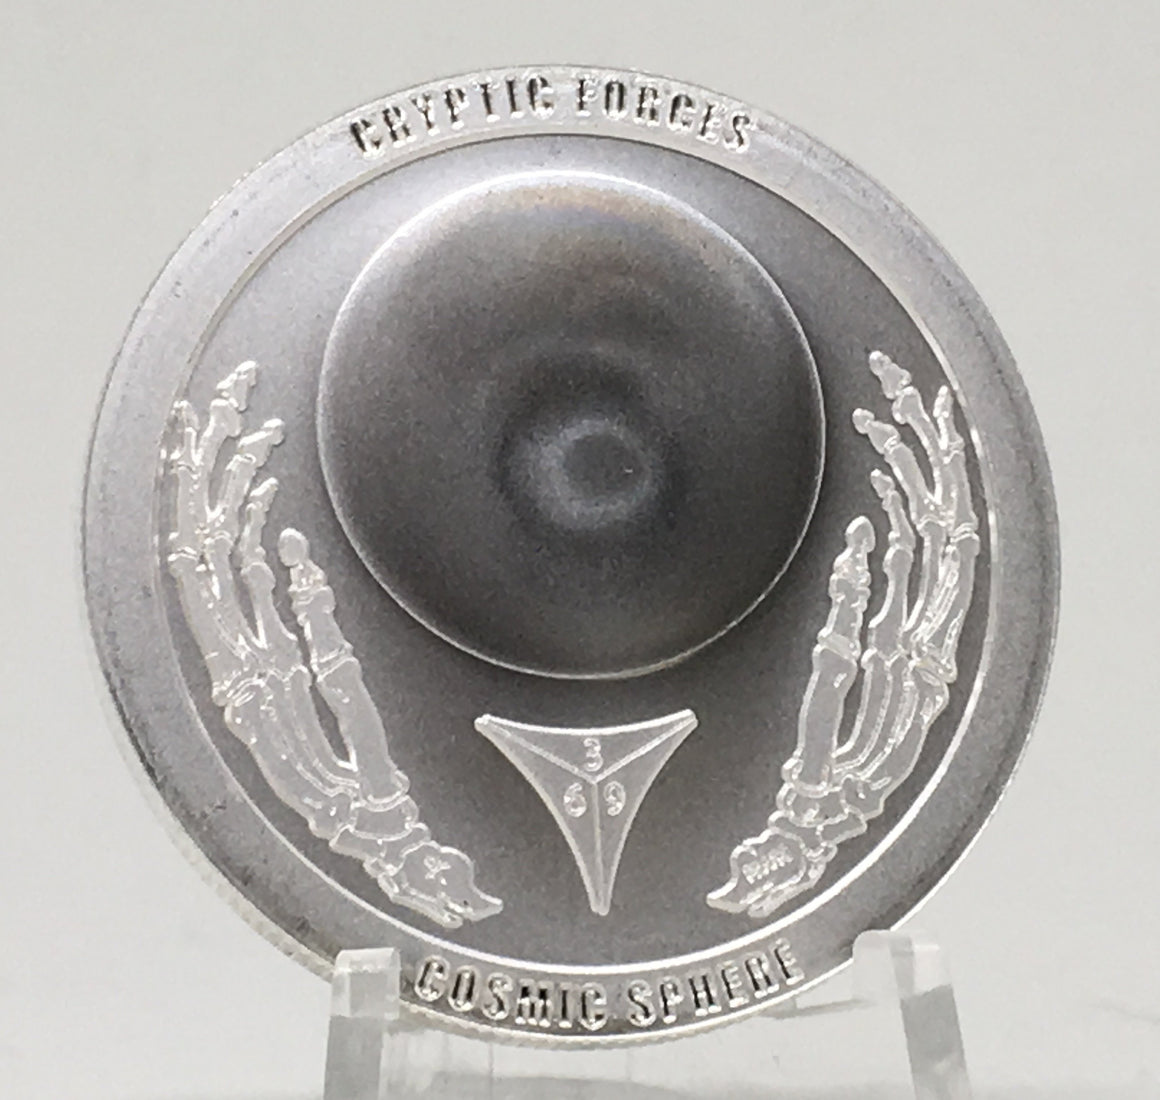 Cryptic Silver Series #6 - Cryptic Forces, BU Finish by Chautauqua Silver Works, 1oz .999 Silver Round.